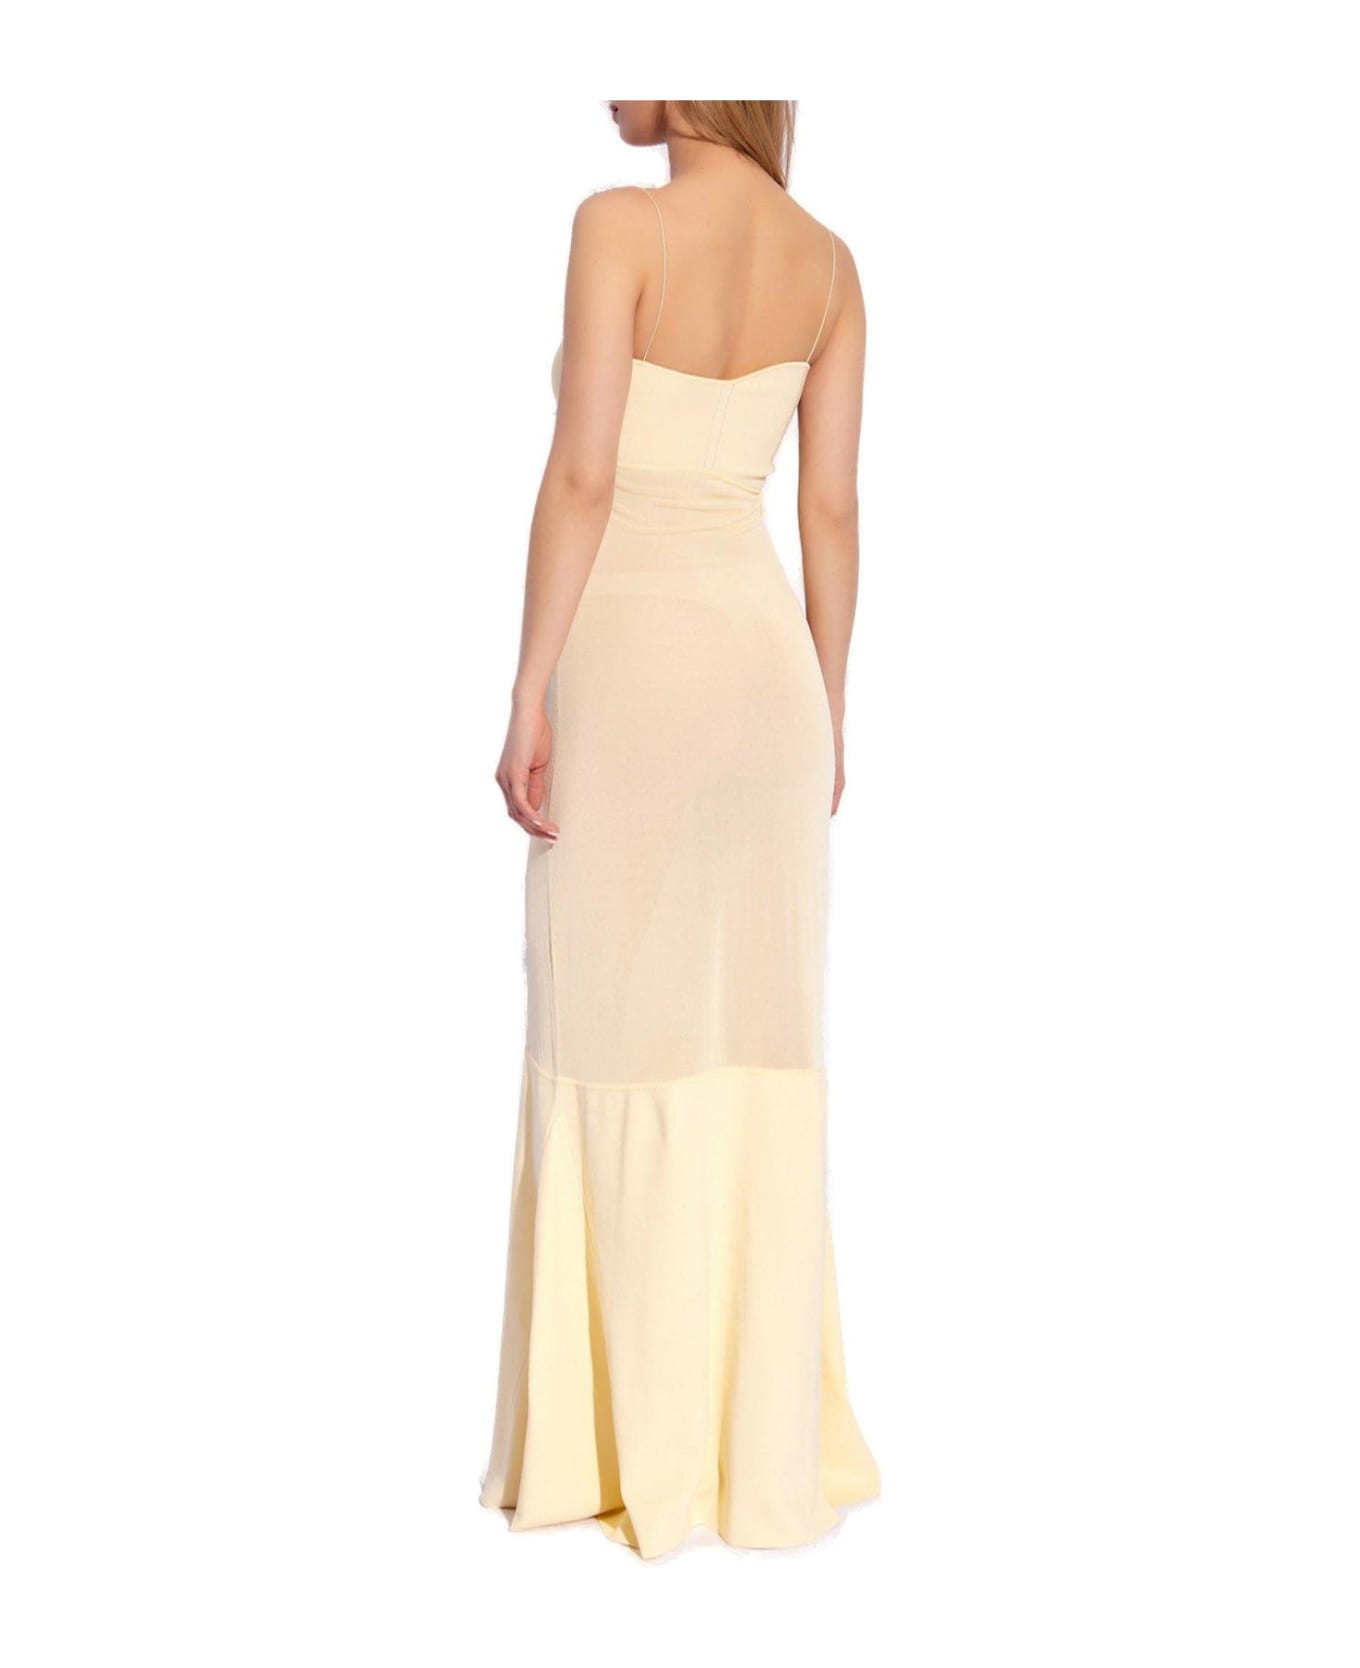 Jacquemus Strapped Maxi Dress - Light yellow